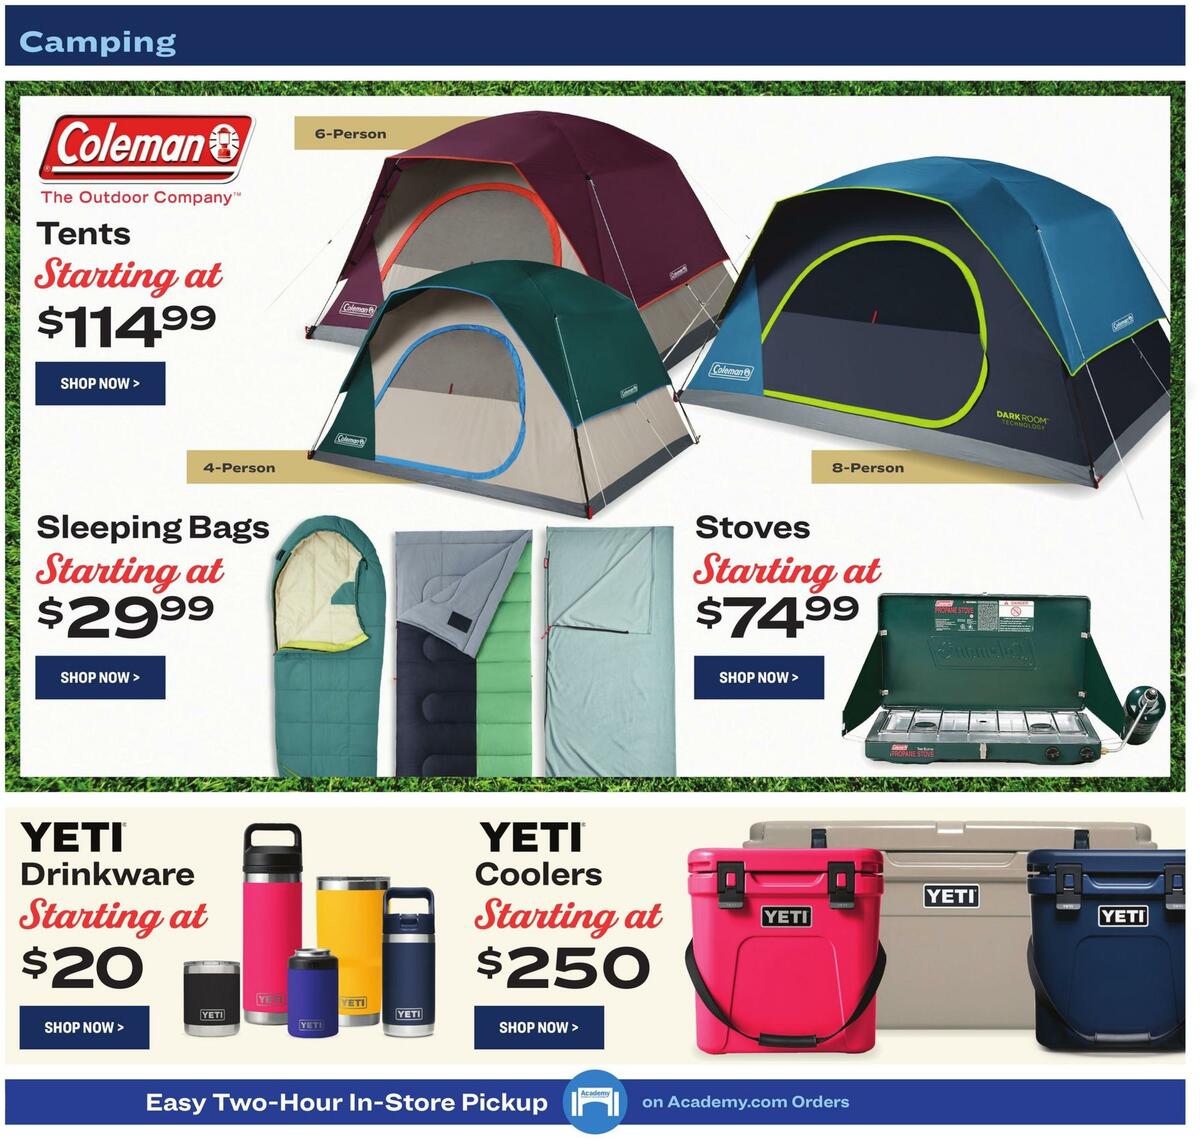 Academy Sports + Outdoors Outdoor Ad Weekly Ad from May 23